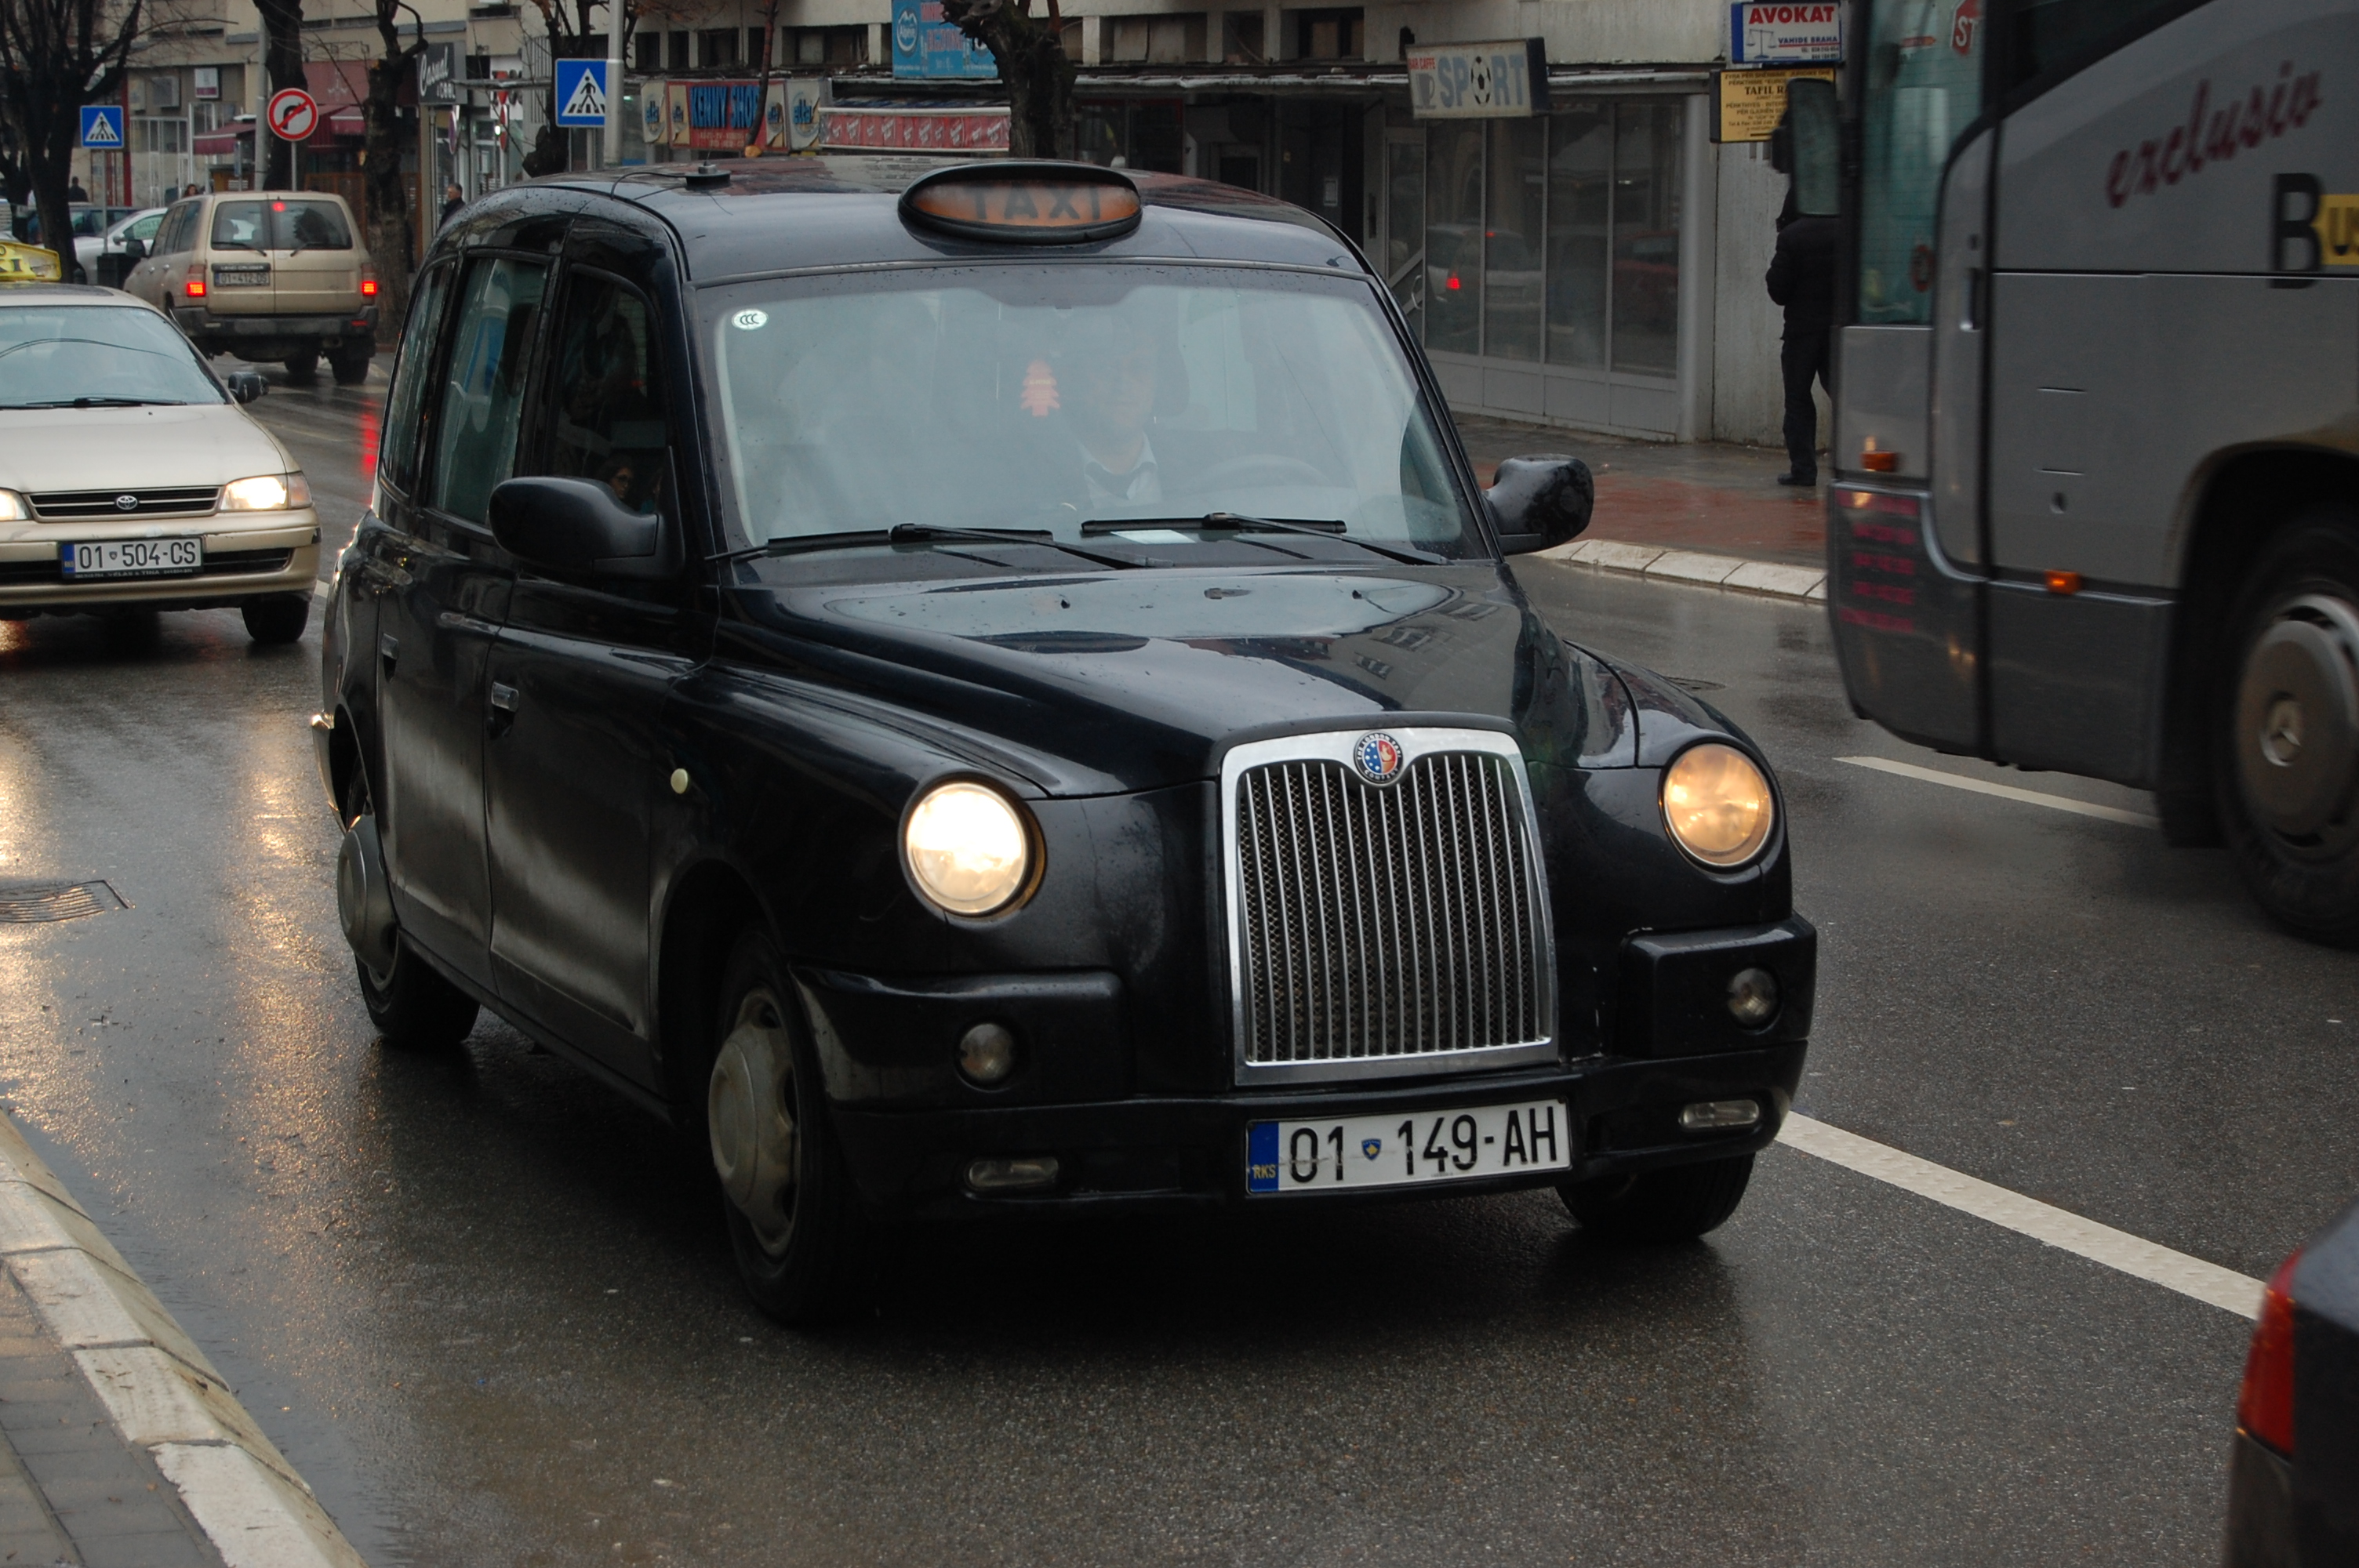 A black cab driver on the road driving in London